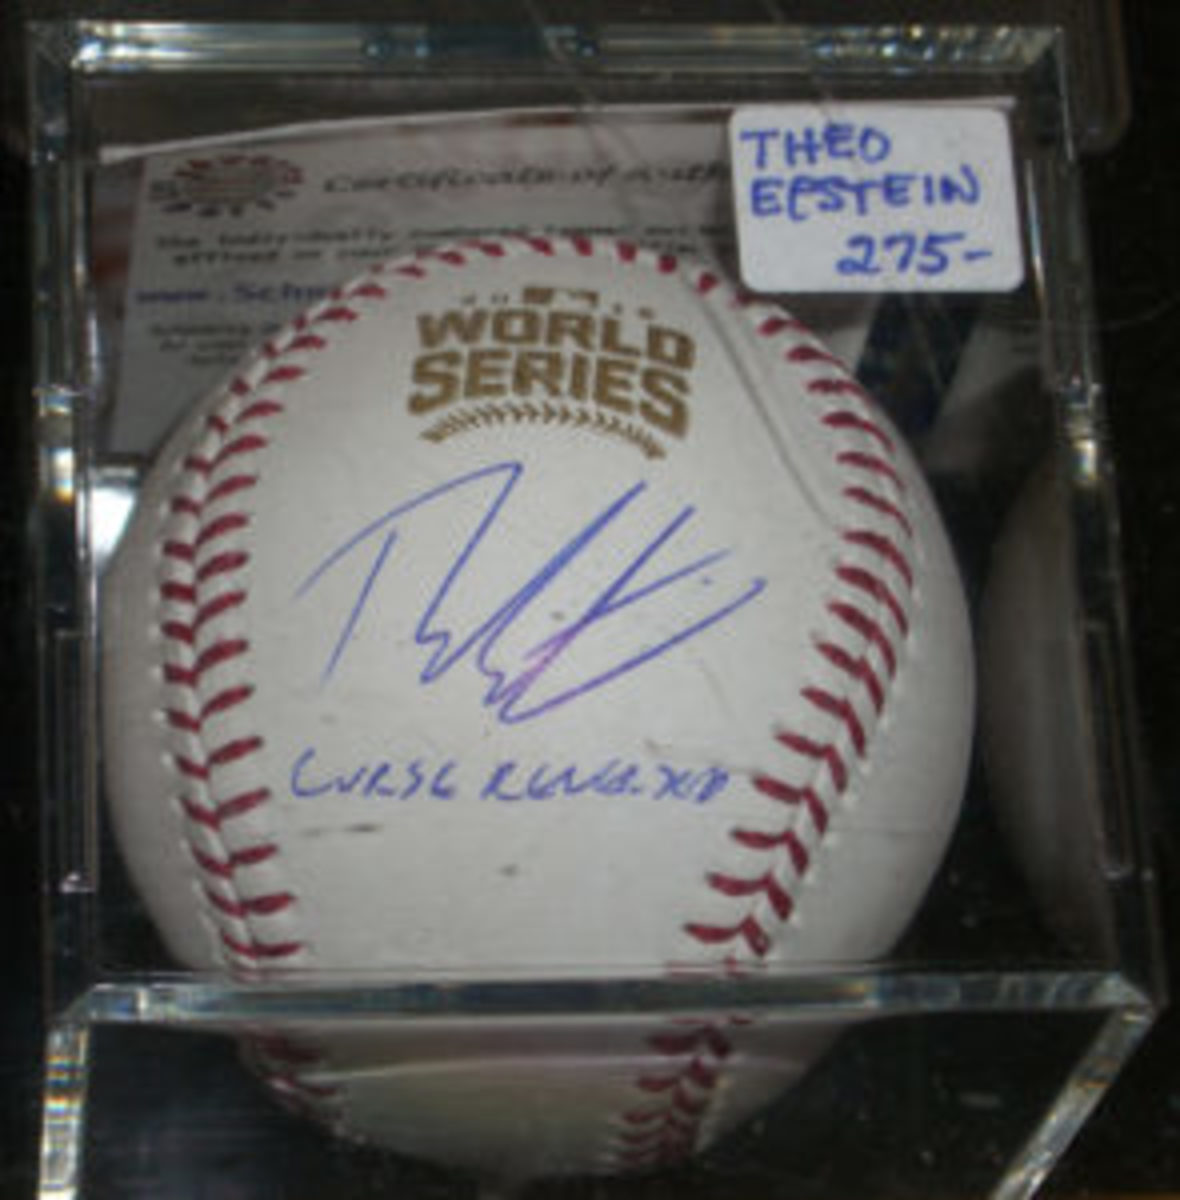  A baseball autographed by Theo Epstein had a sale price of $275. (Ross Forman photo)